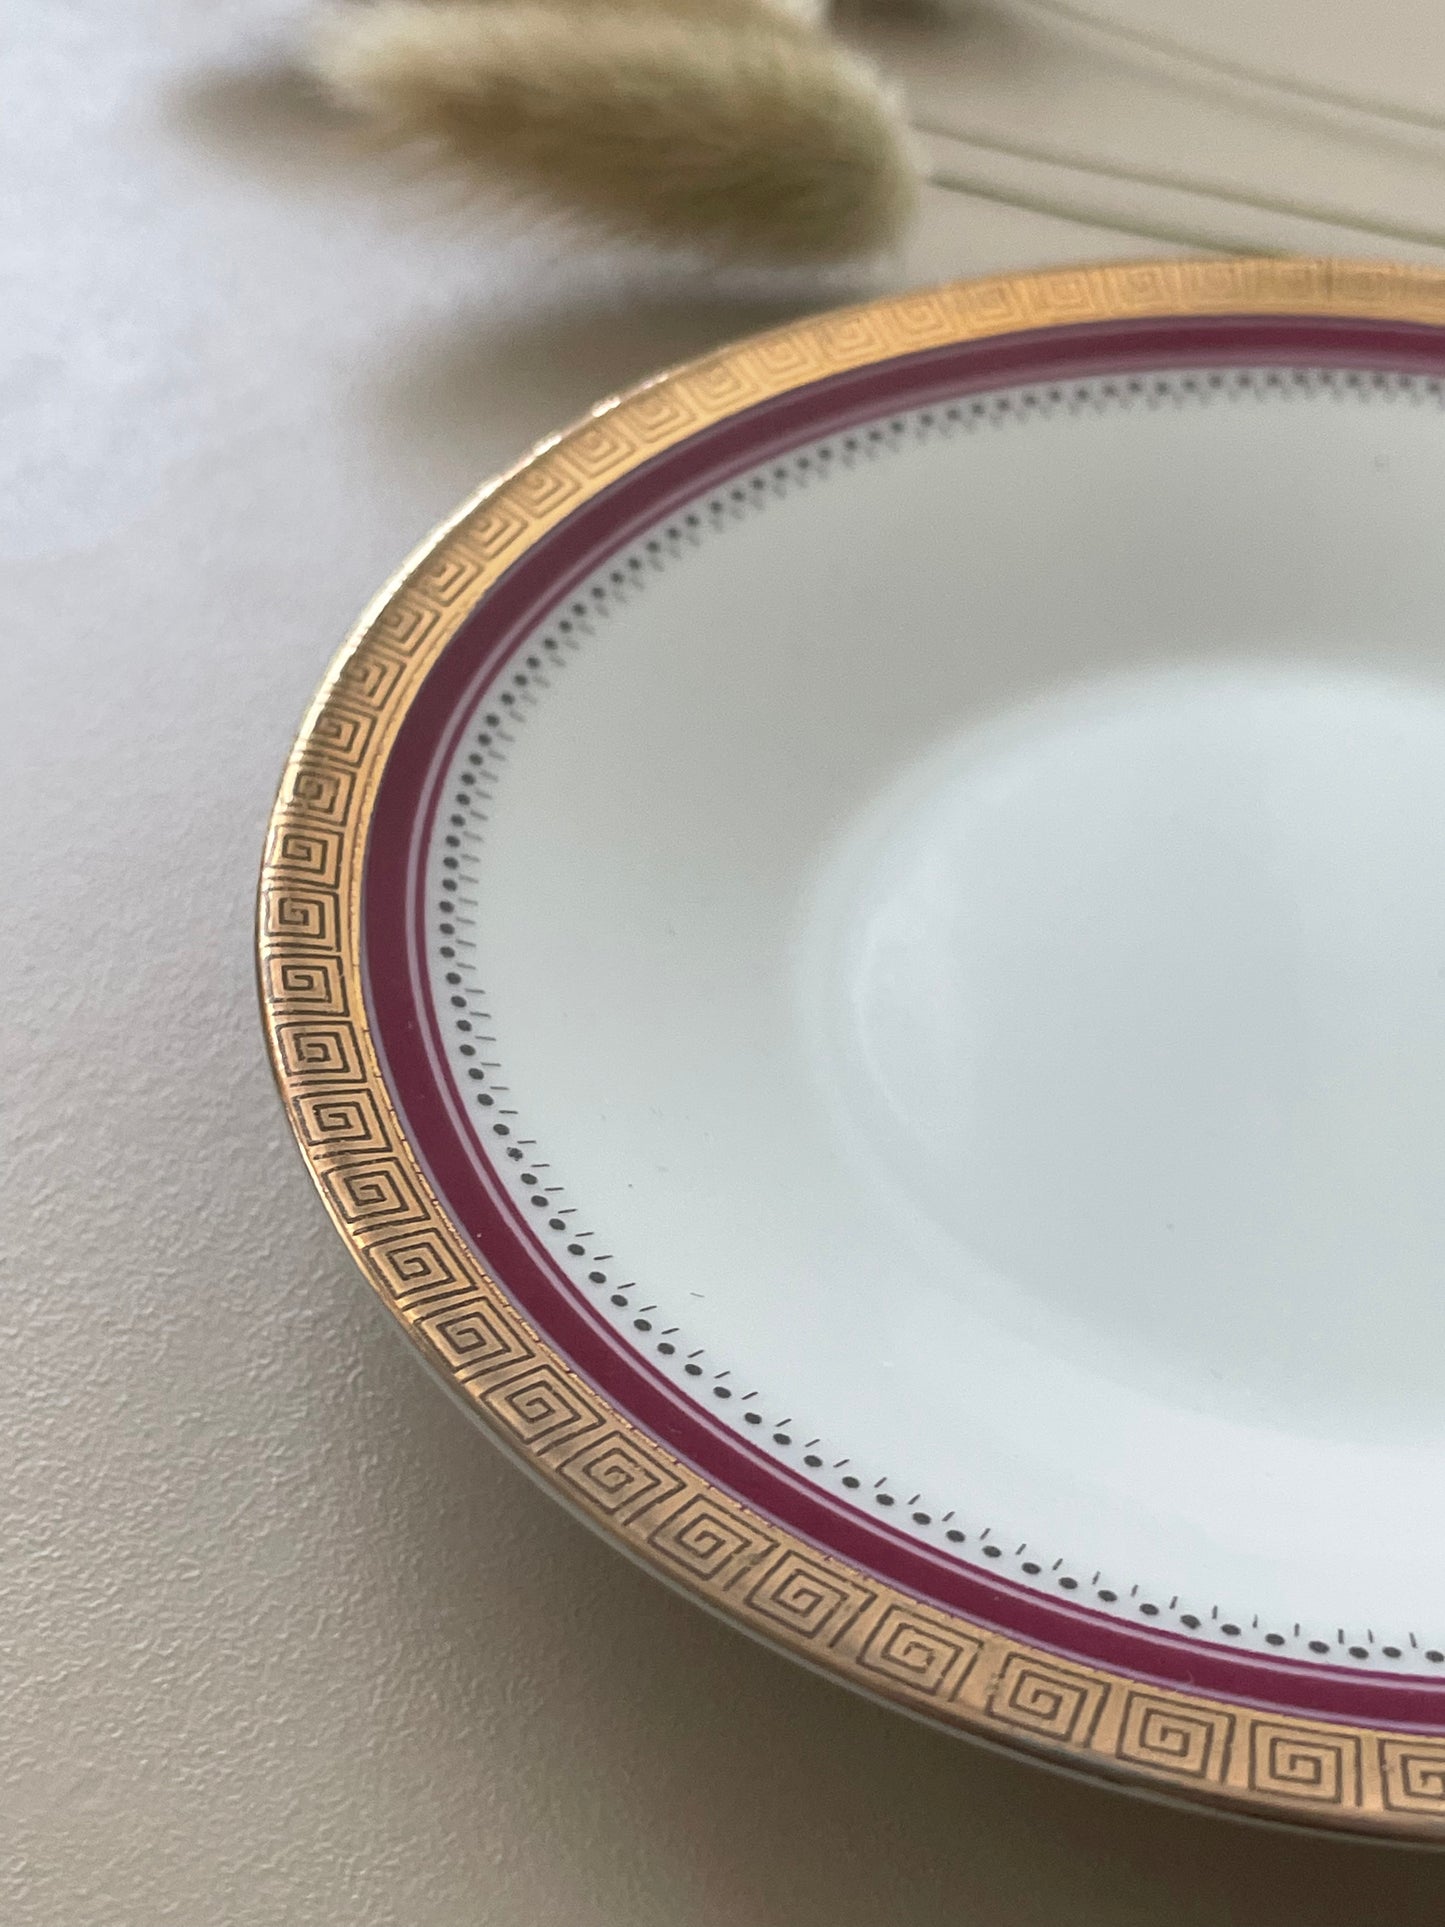 Pink And Gold Edged Saucer Dish